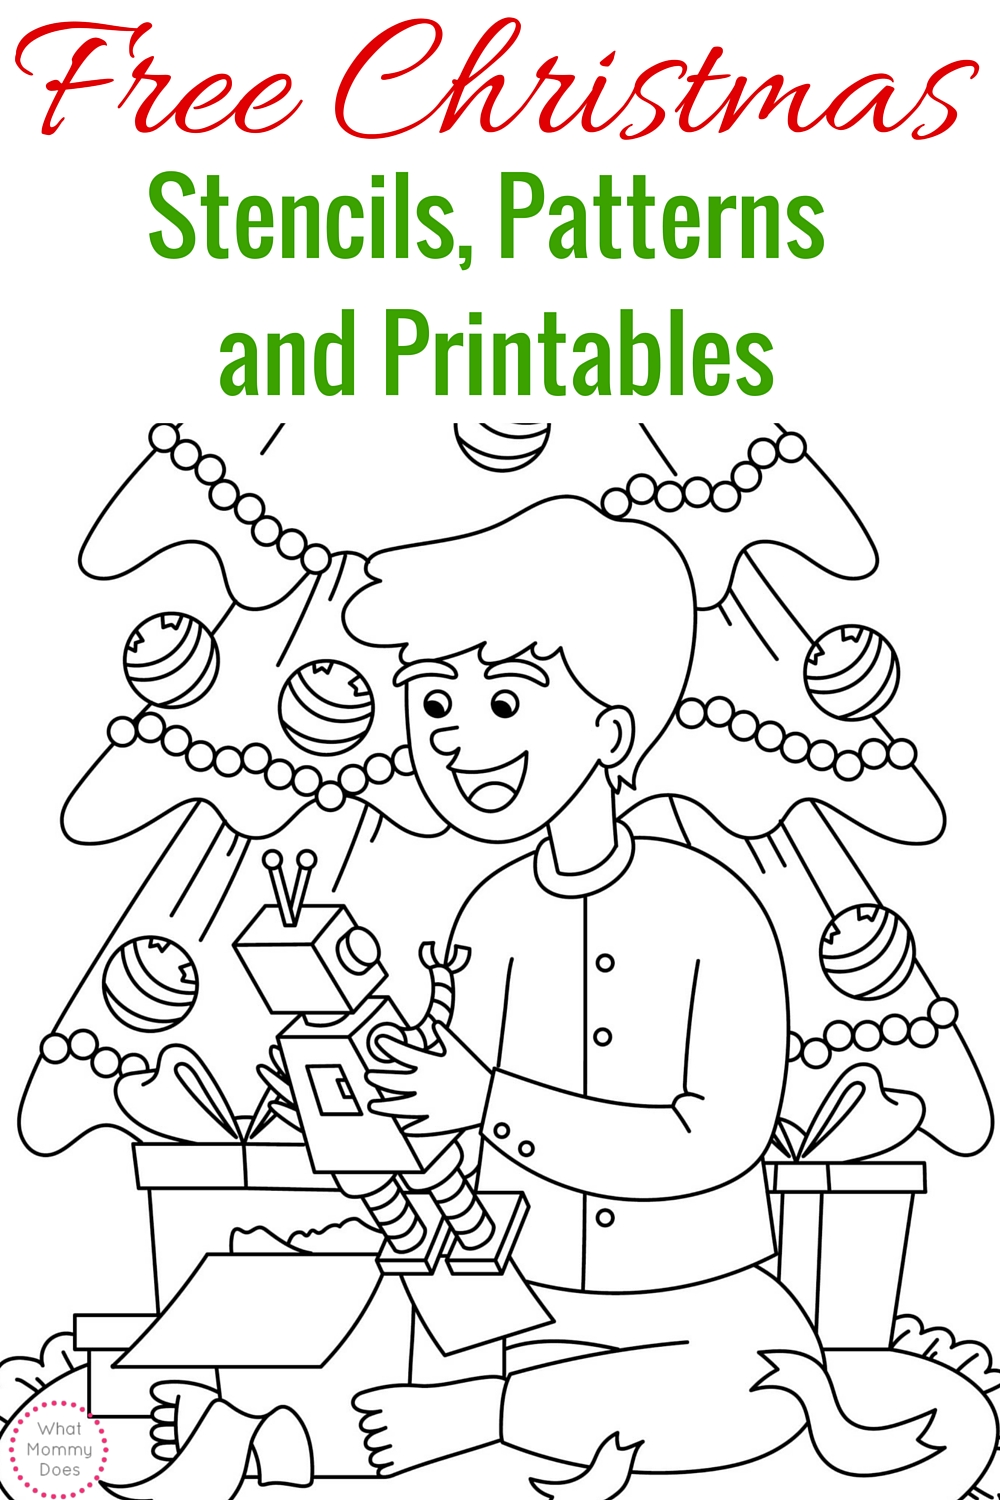 Free Printable Christmas Stencils Christmas Tree Templates Santa Claus Patterns What Mommy Does